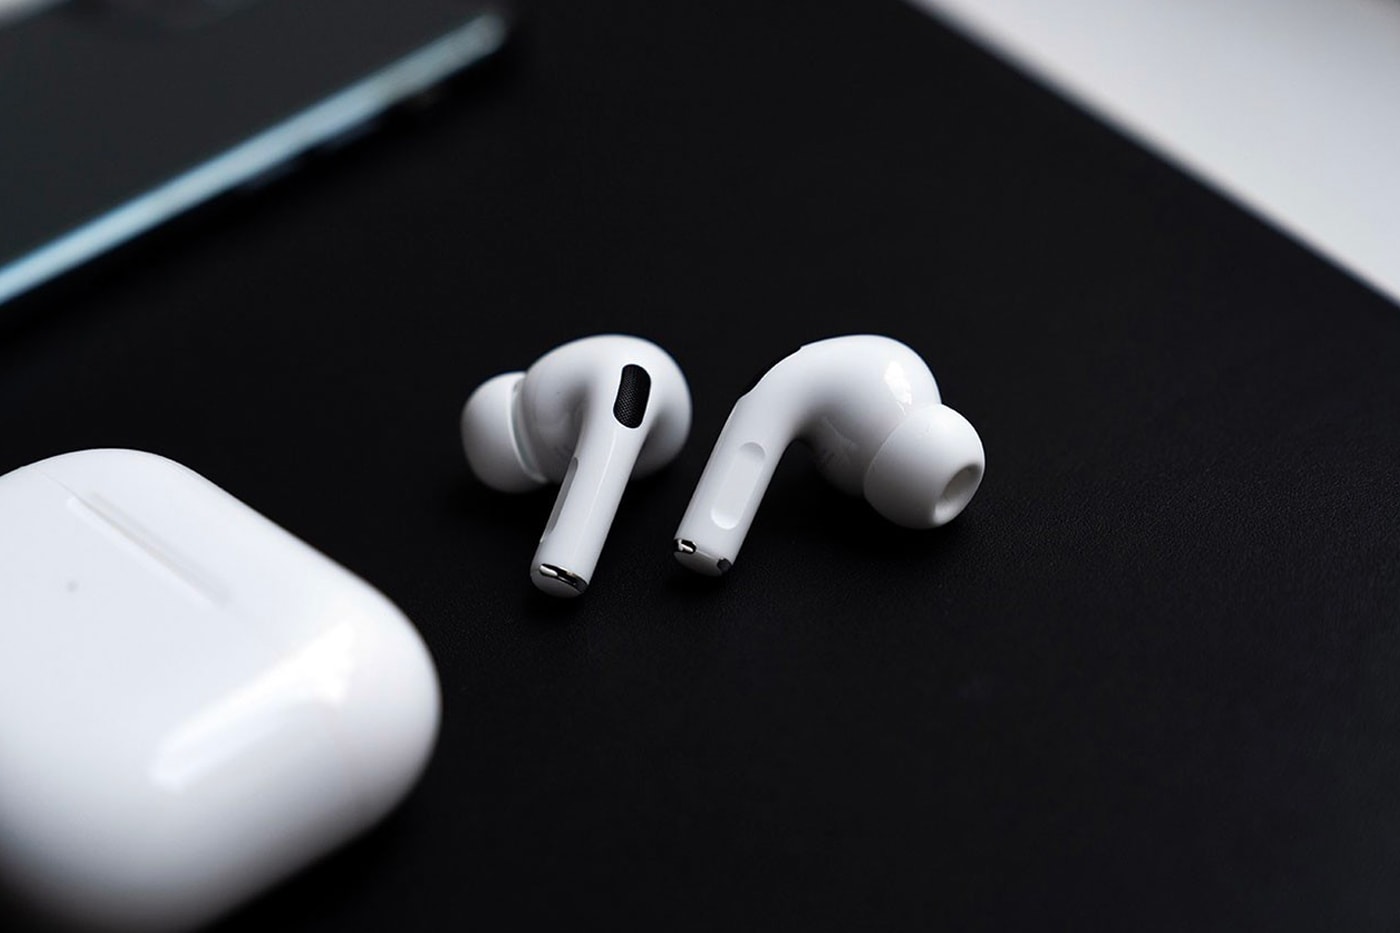 Supposed leaked 'AirPods 3' images suggest a blend of AirPods